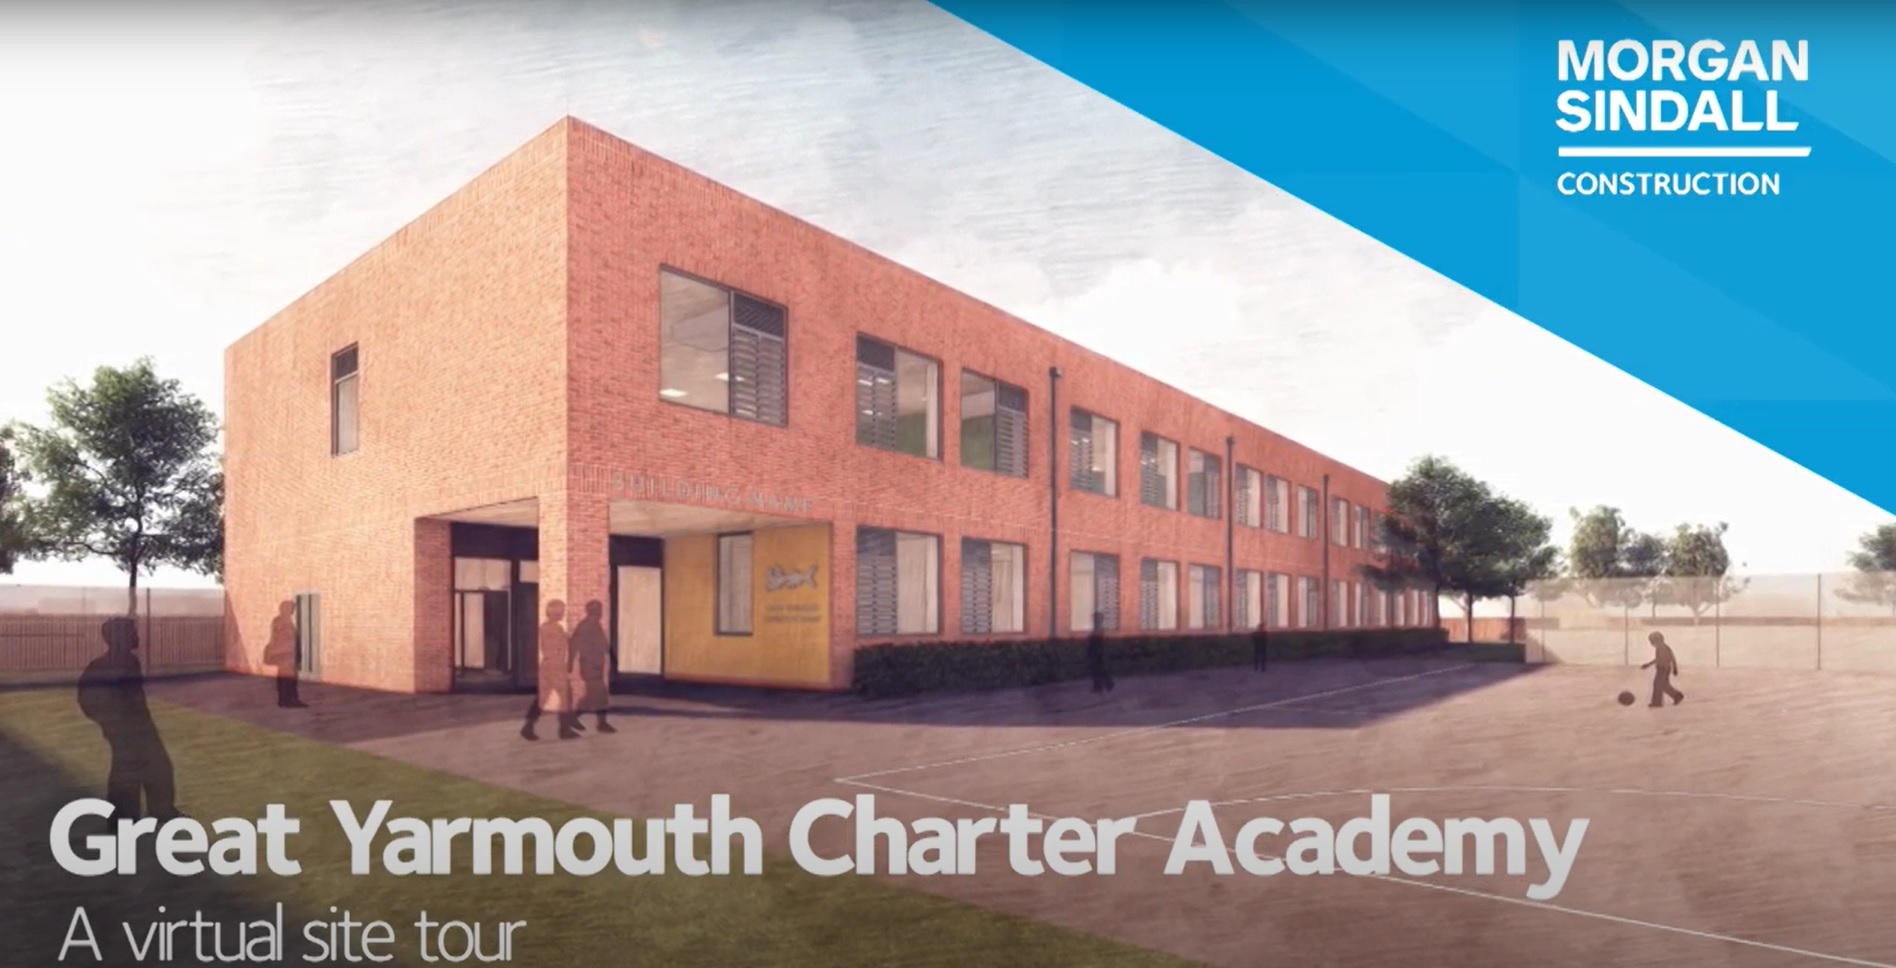 Virtual Tour of the Great Yarmouth Charter Academy with Morgan Sindall